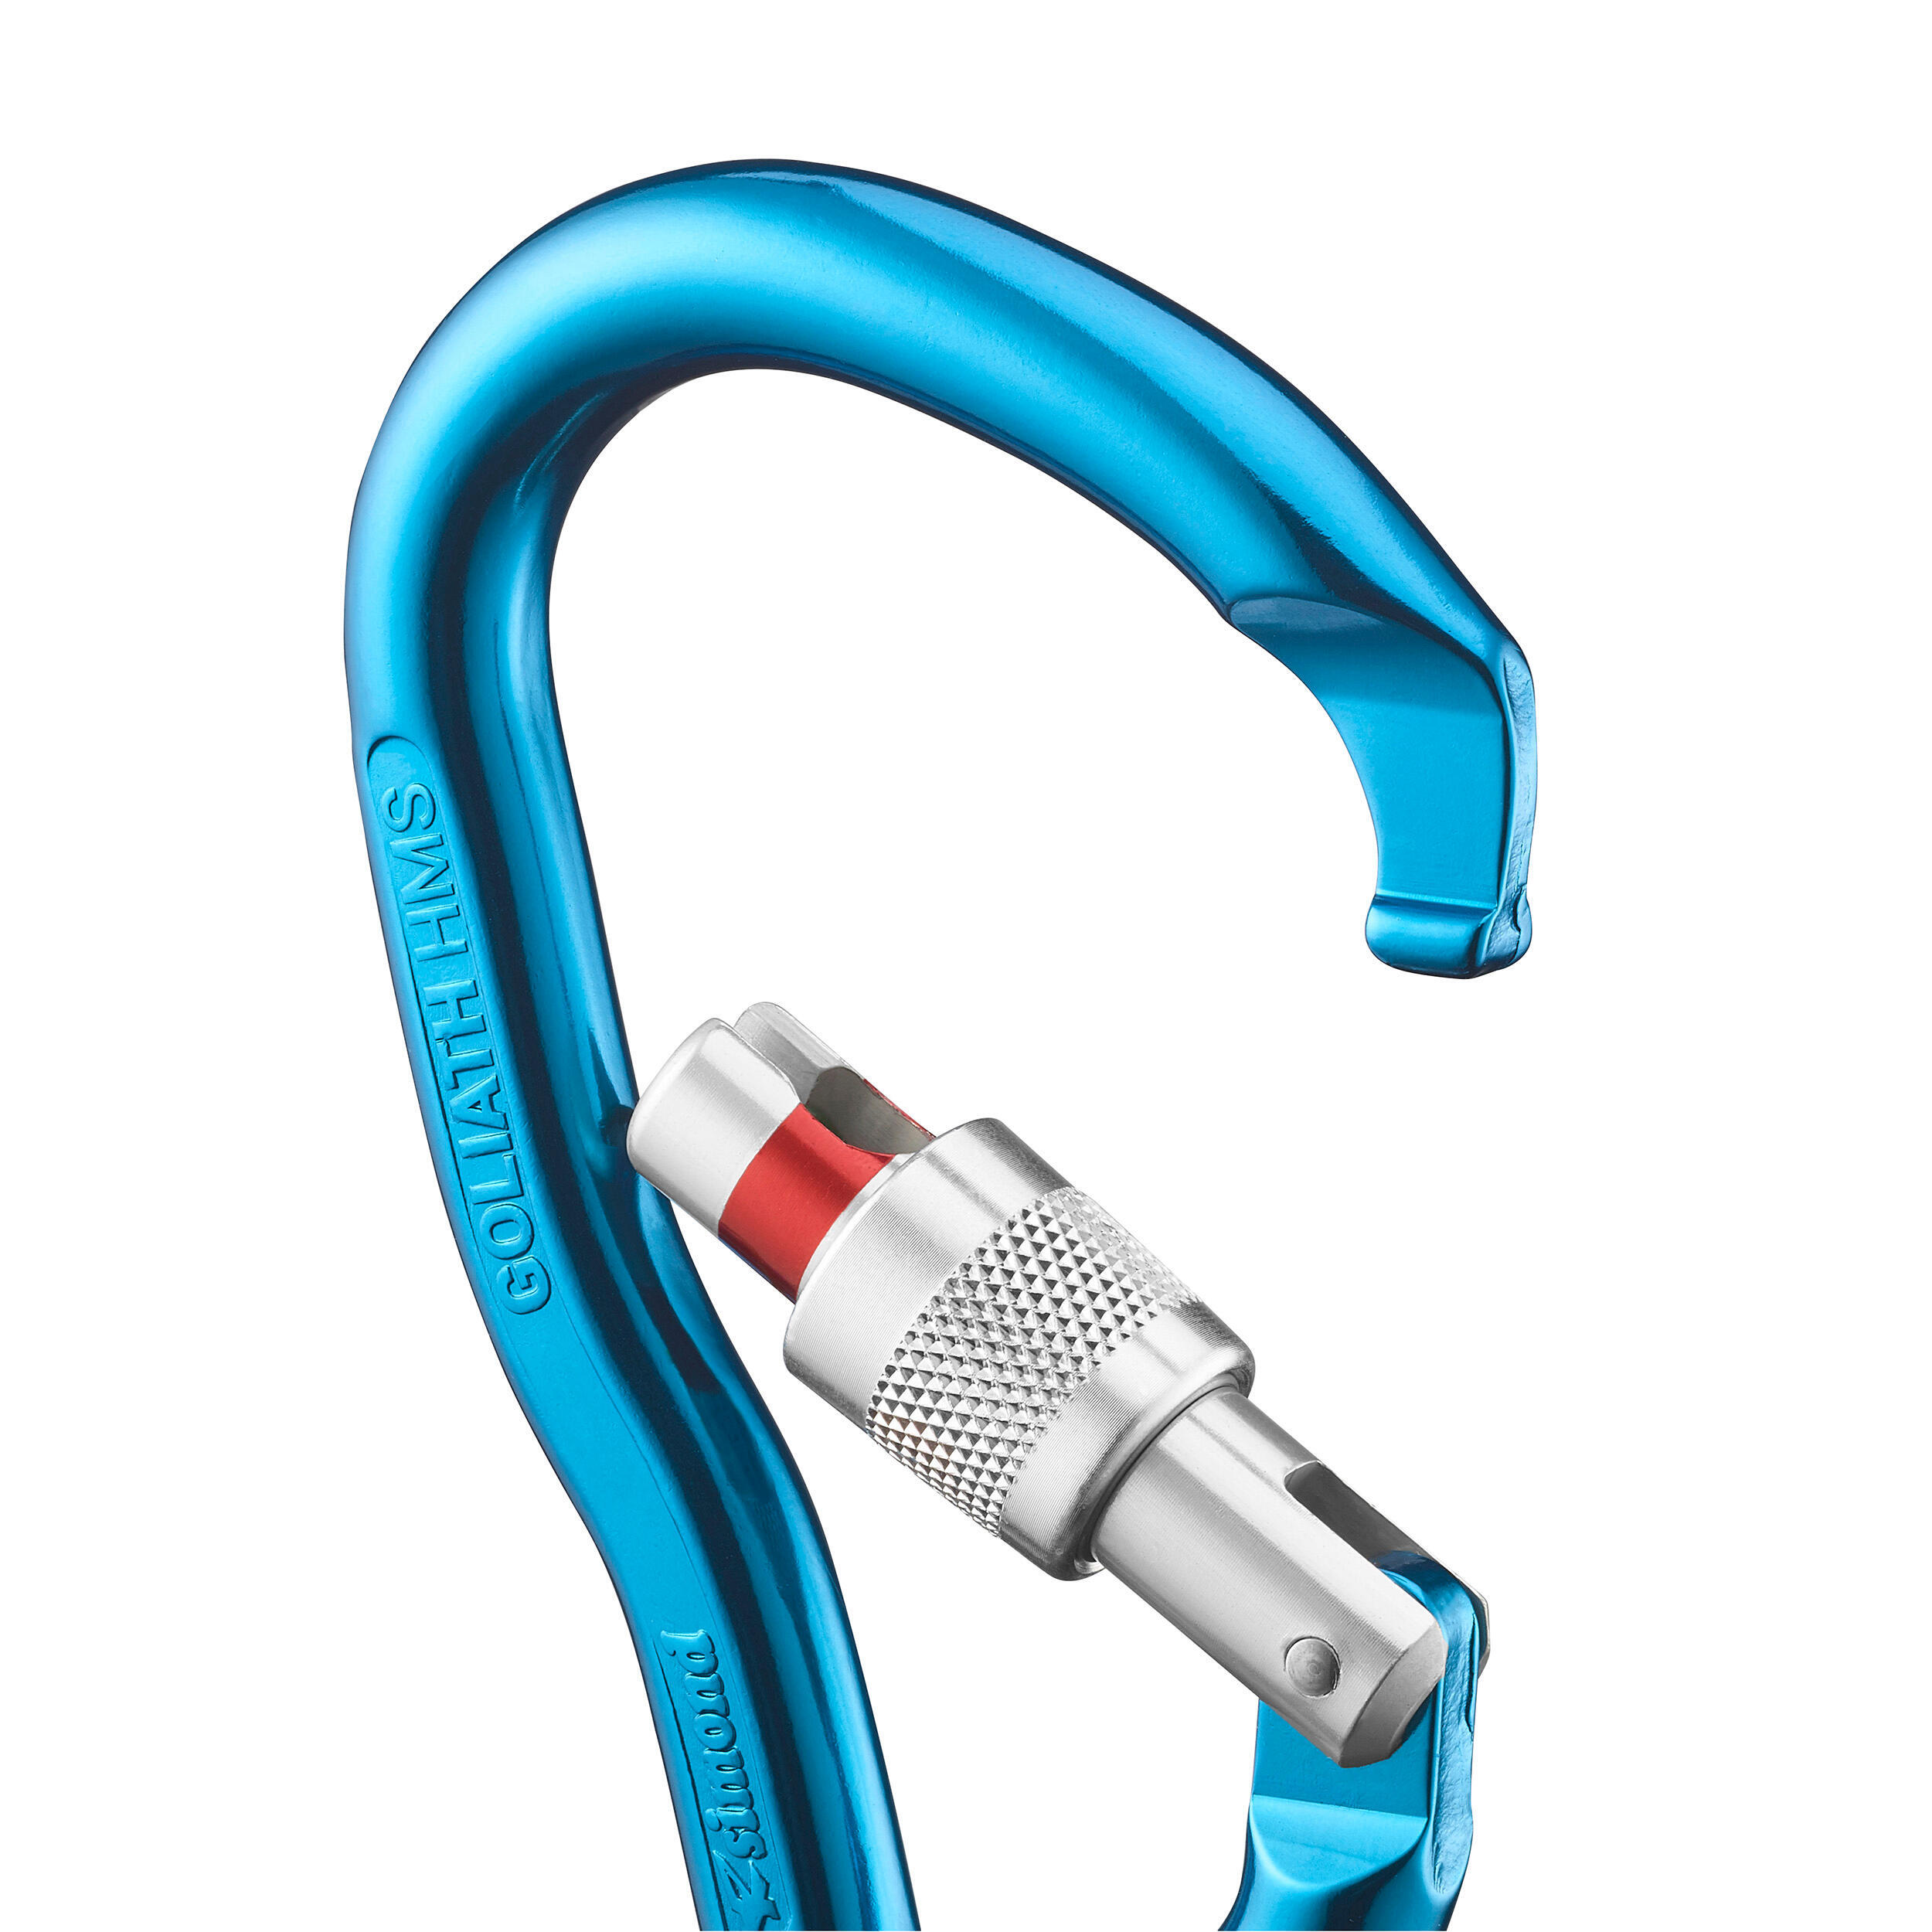 HMS MOUNTAINEERING AND CLIMBING SCREWGATE CARABINER GOLIATH SECURE - BLUE 3/6